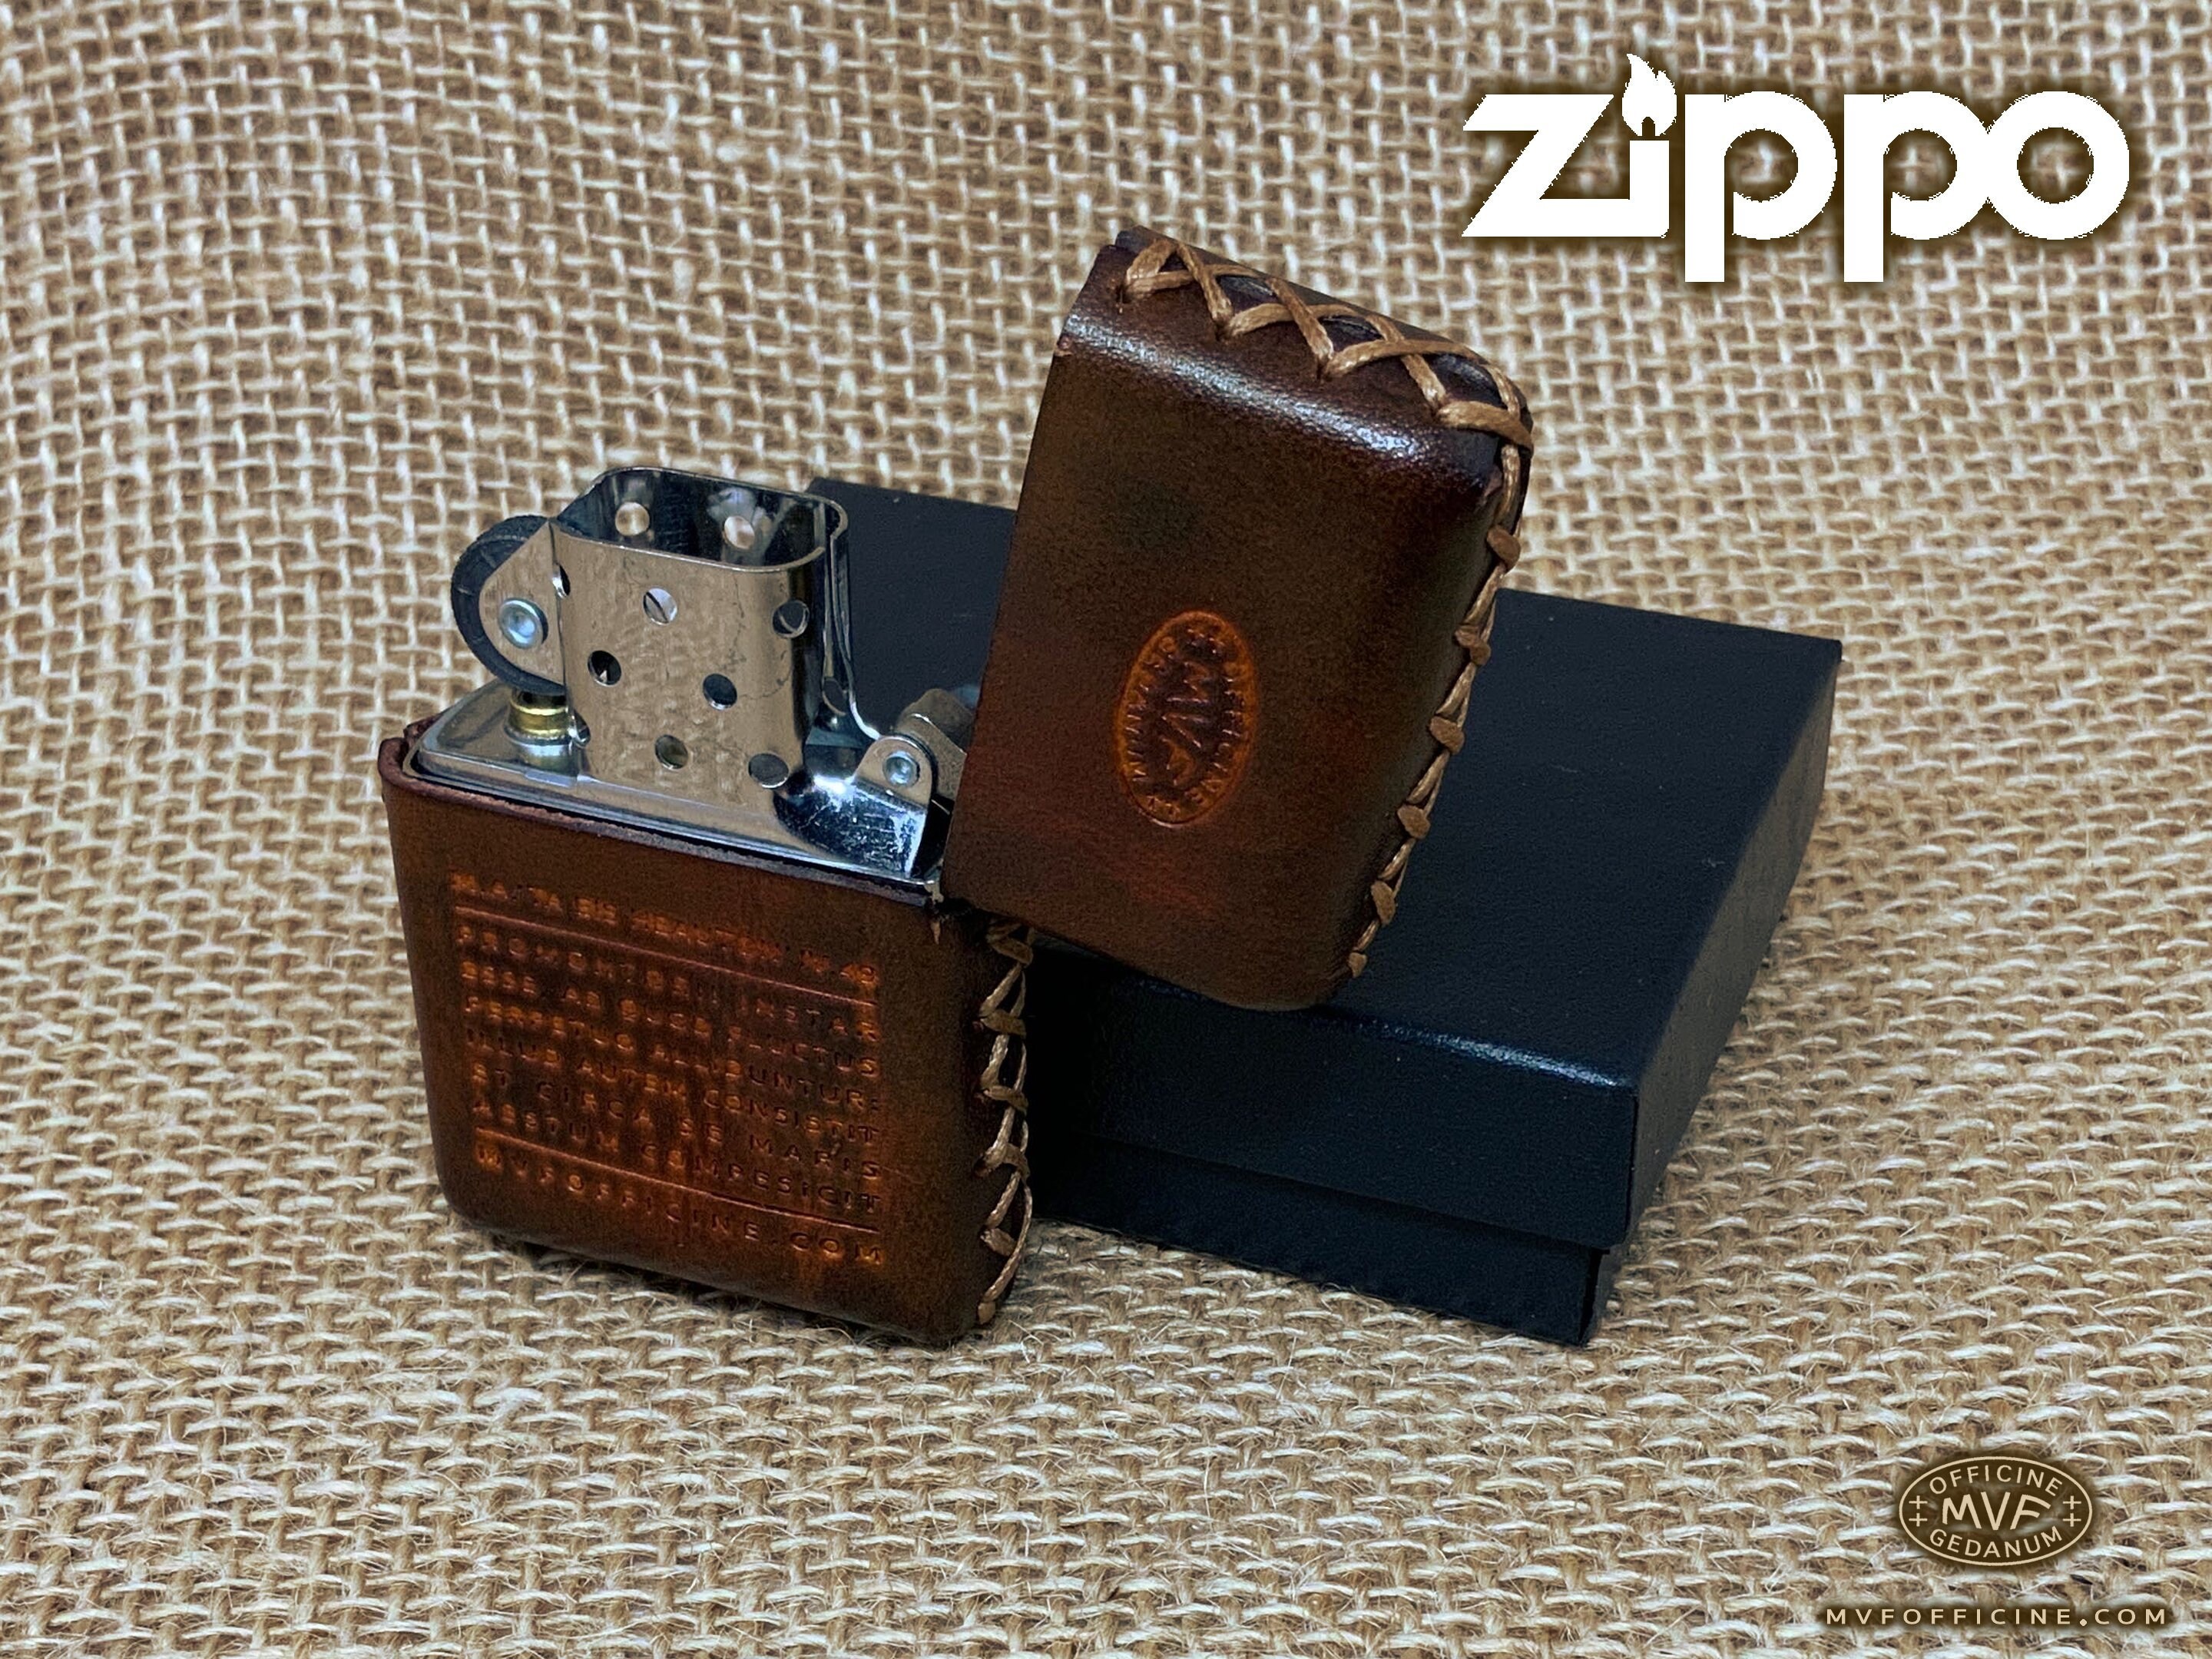 Zippo Lighter With Leather Cover zippo Brand Lighter 